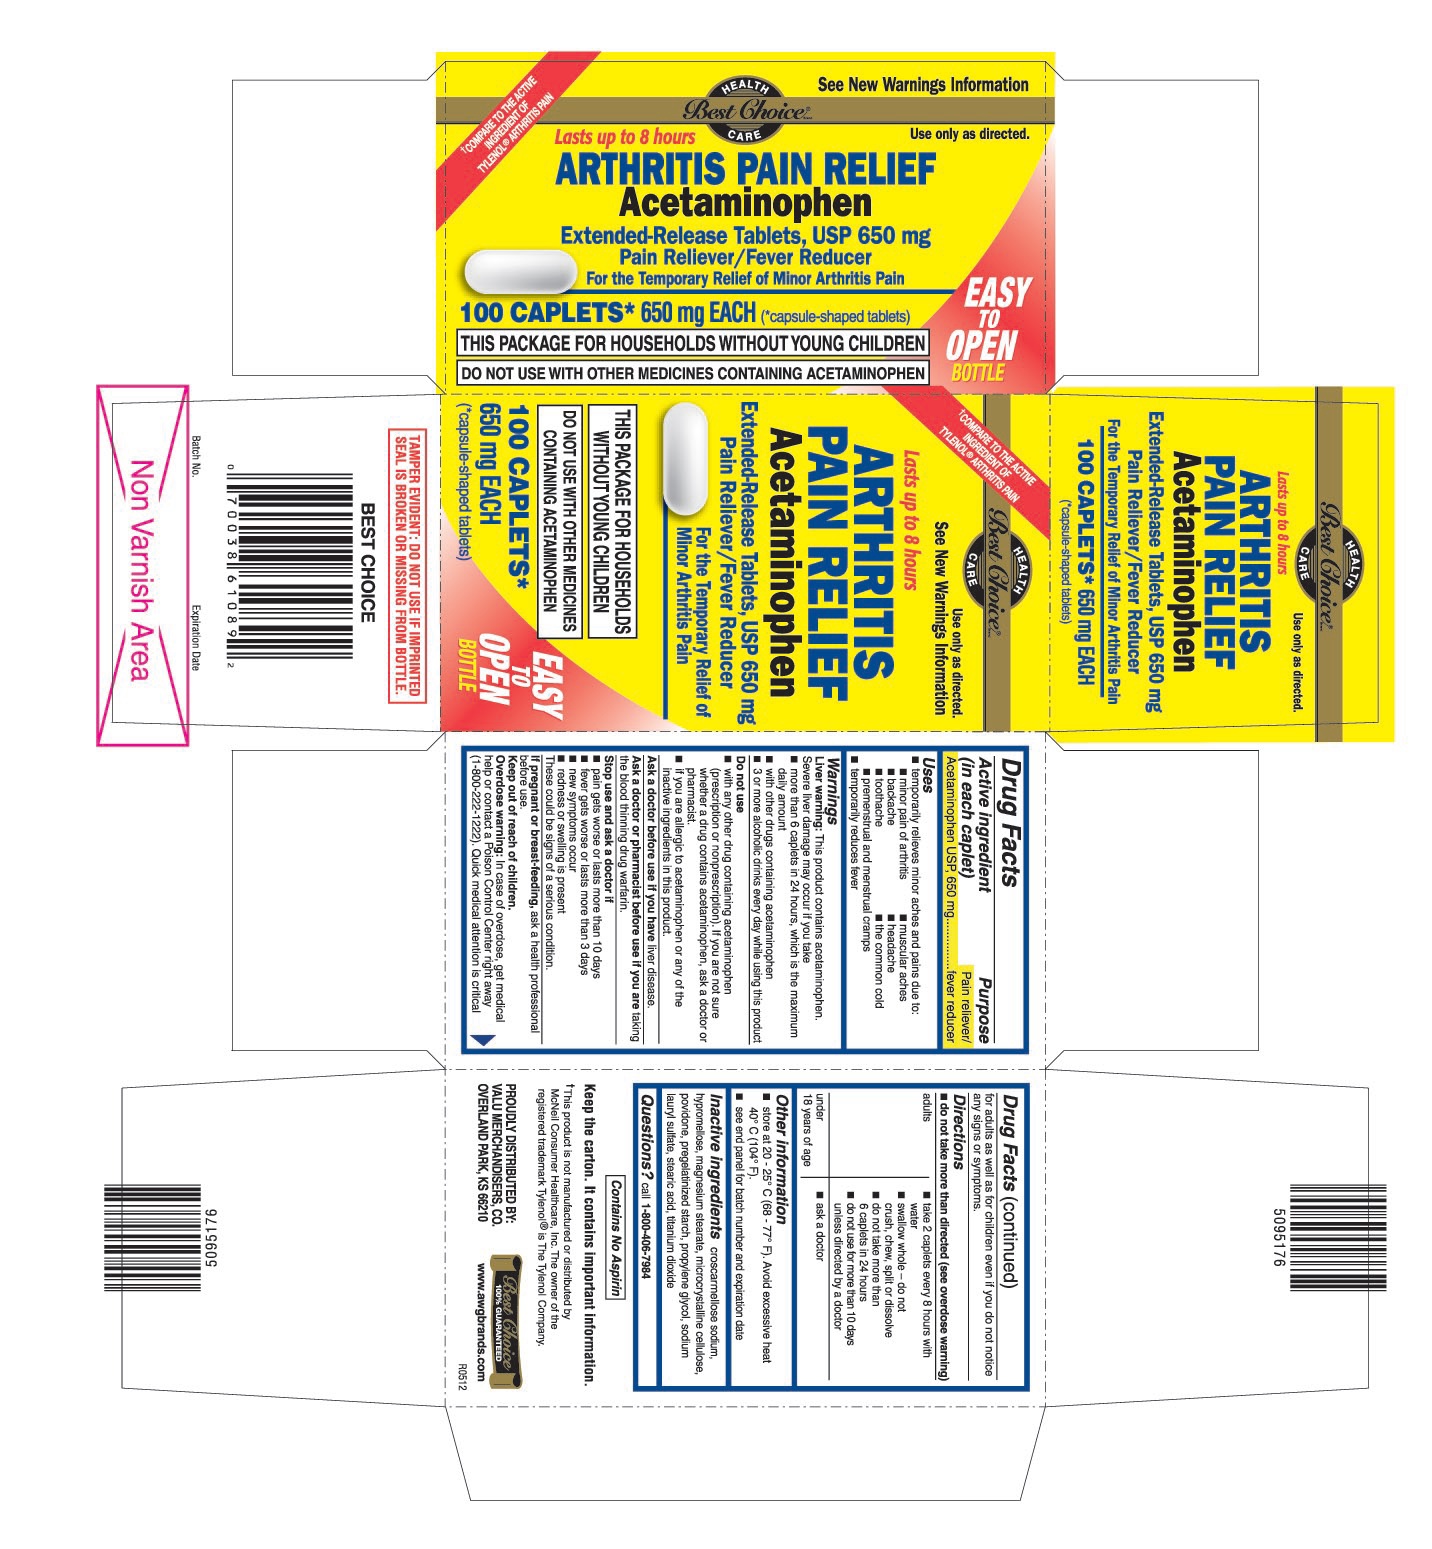 This is the 100 count bottle carton label for Best Choice Acetaminophen extended-release tablets, USP 650 mg.